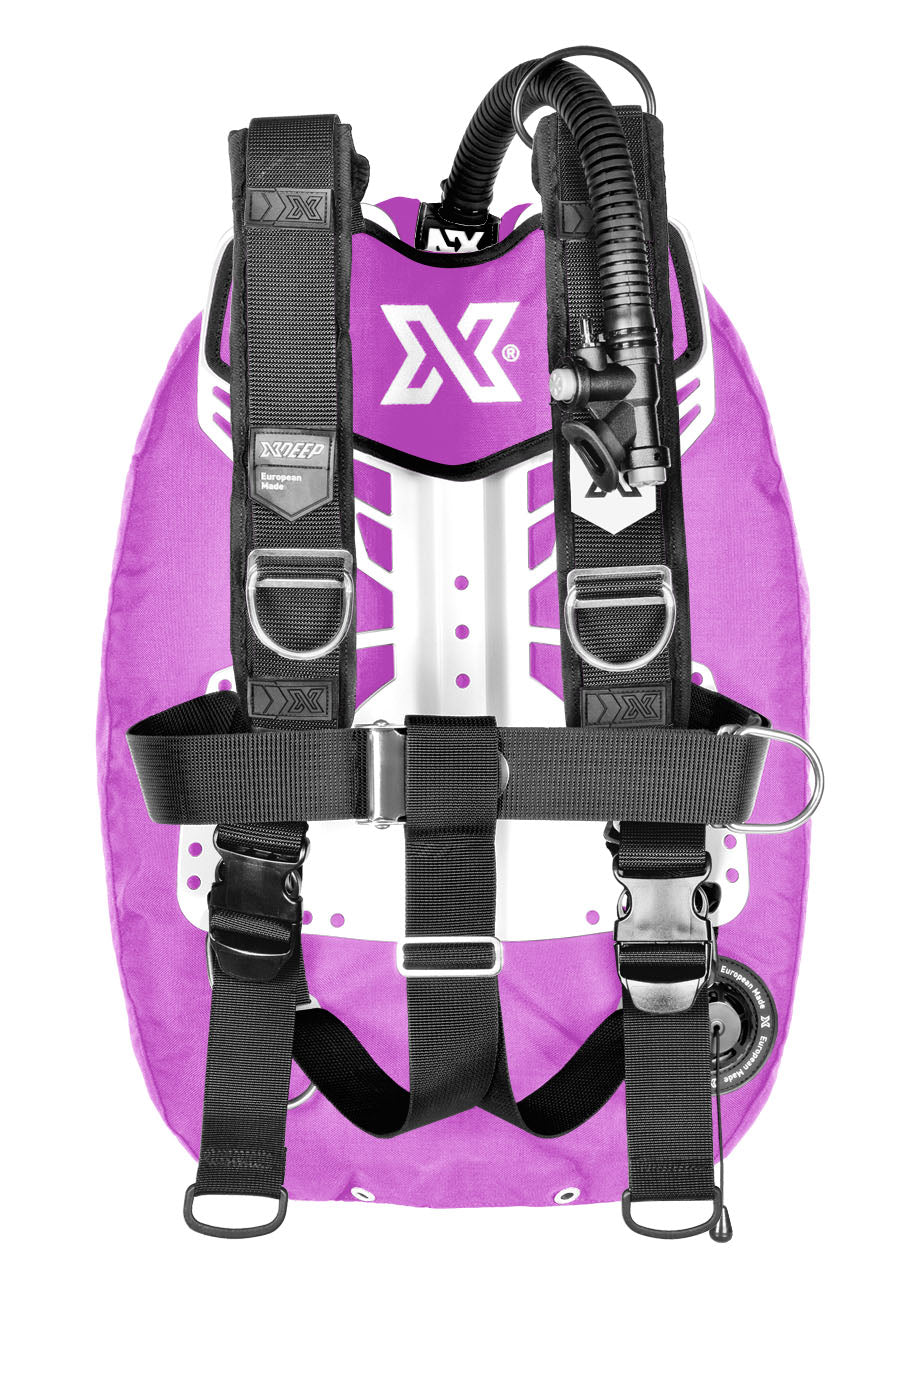 XDEEP XDEEP Zen Ultralight Wing System Deluxe / Small / Lavender - Oyster Diving